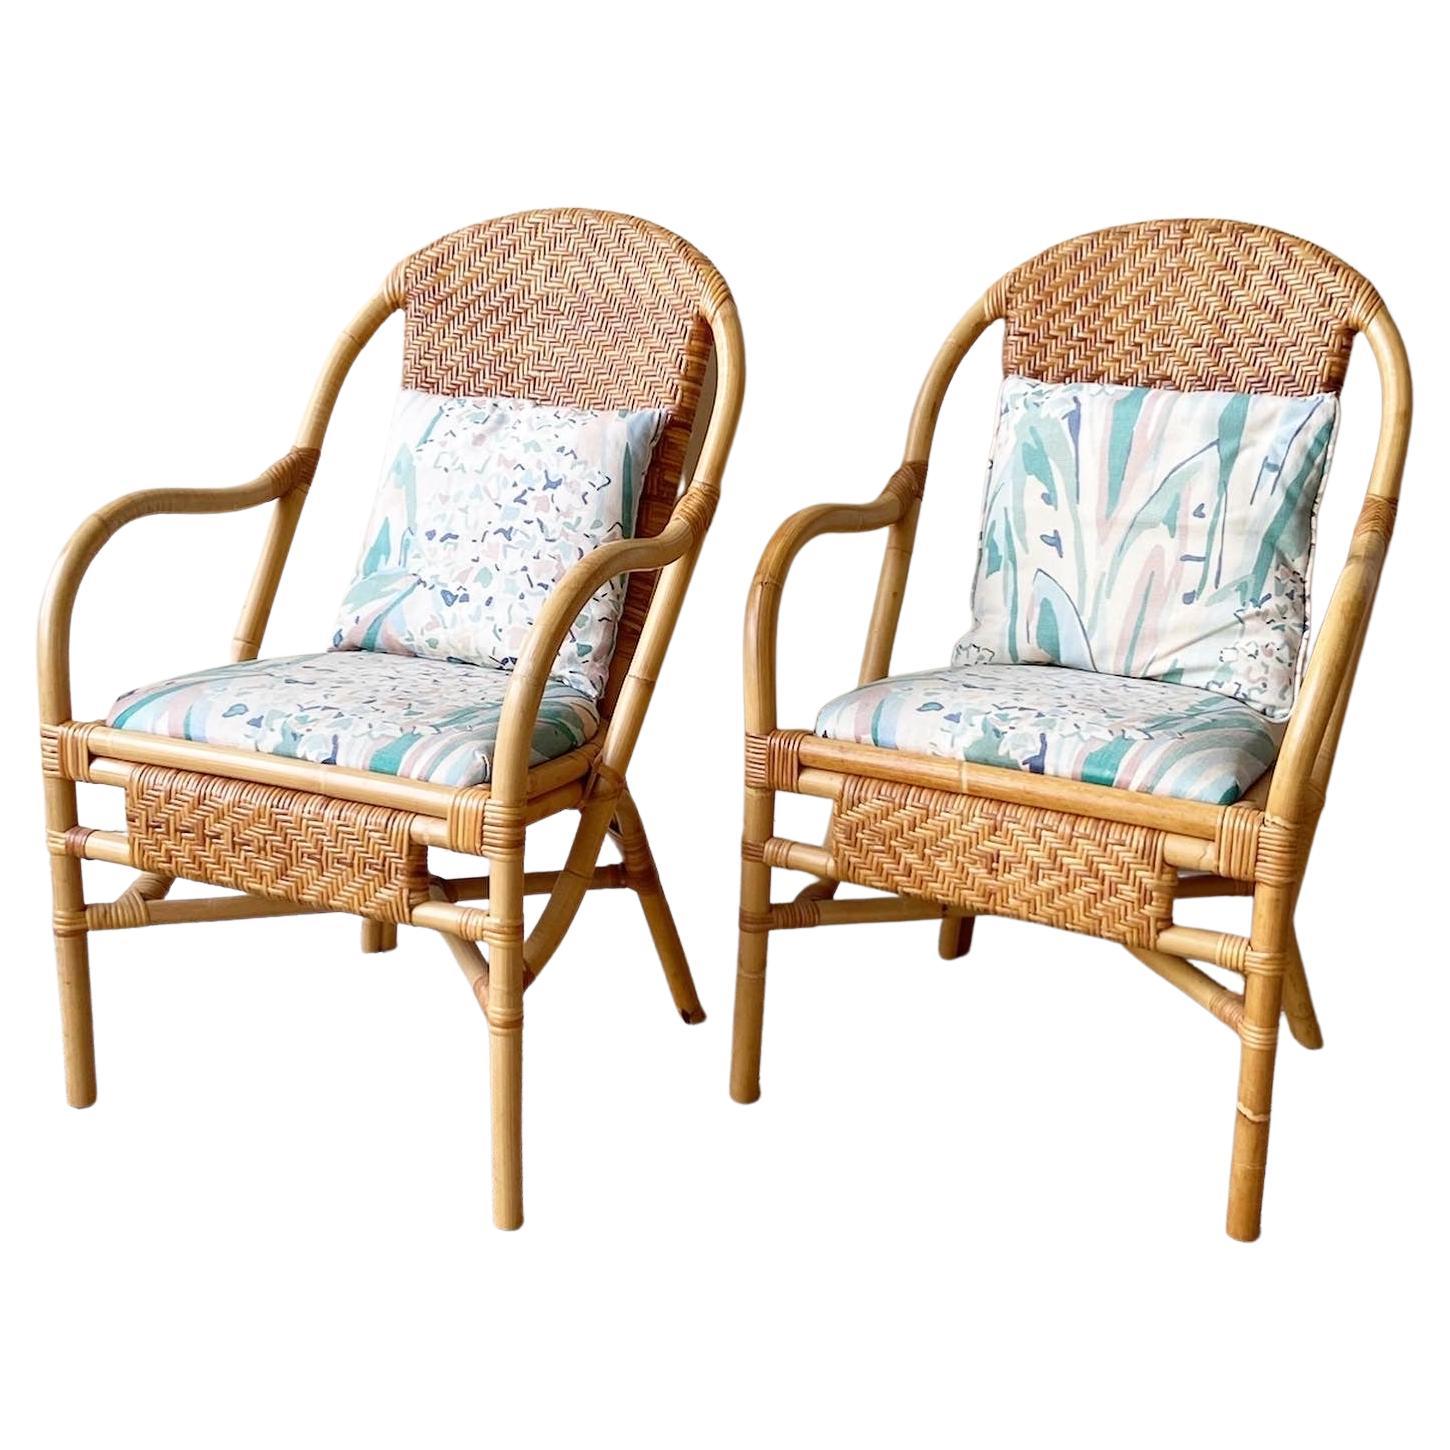 Boho Chic Bamboo Rattan and Wicker Arm Chairs For Sale